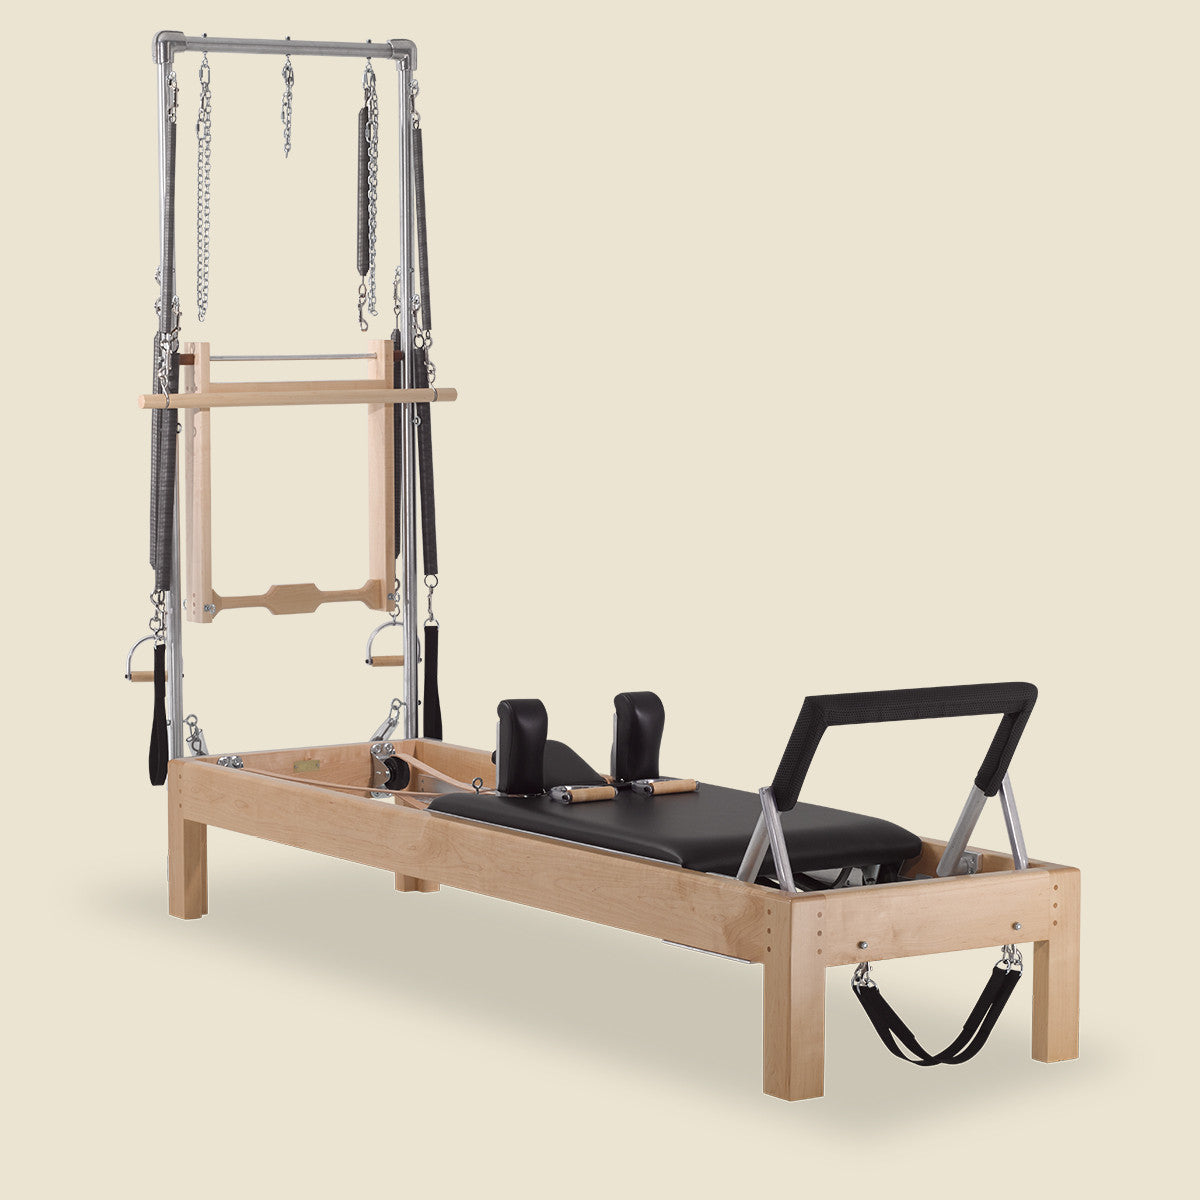 What's Old is New Again - Gratz™ Pilates